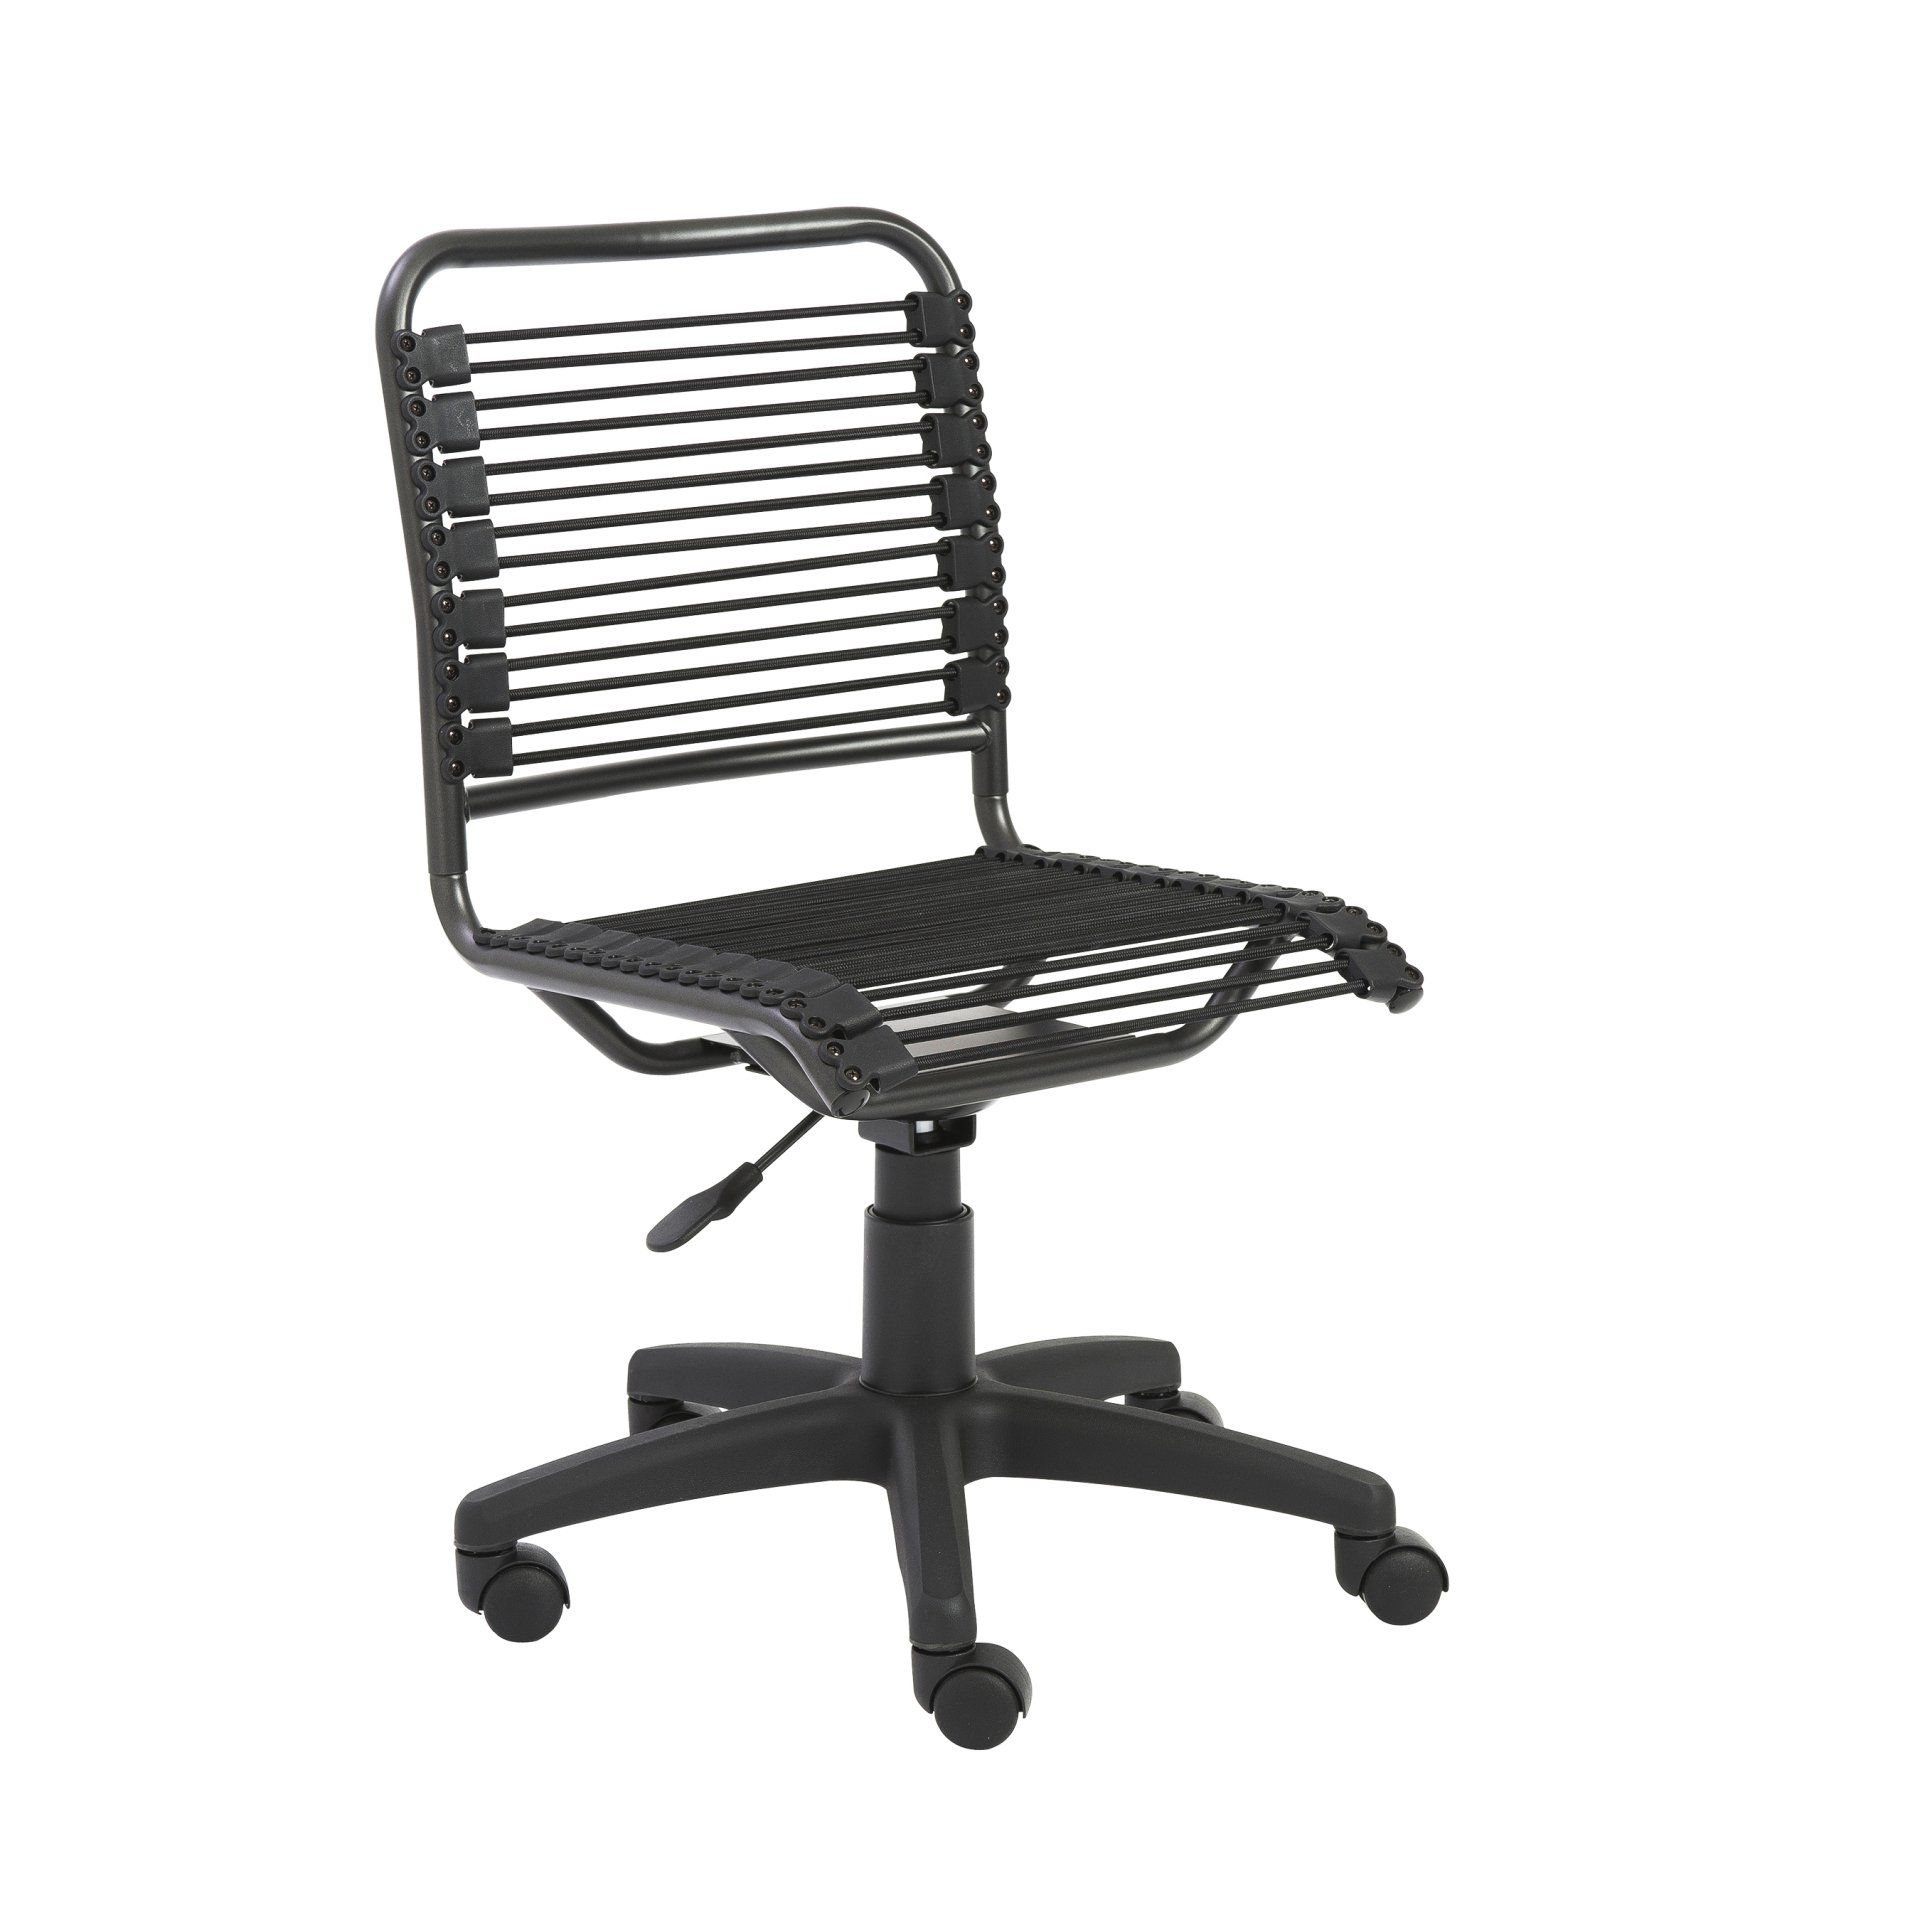 Bungie Low Back Office Chair - black from Viking Trader